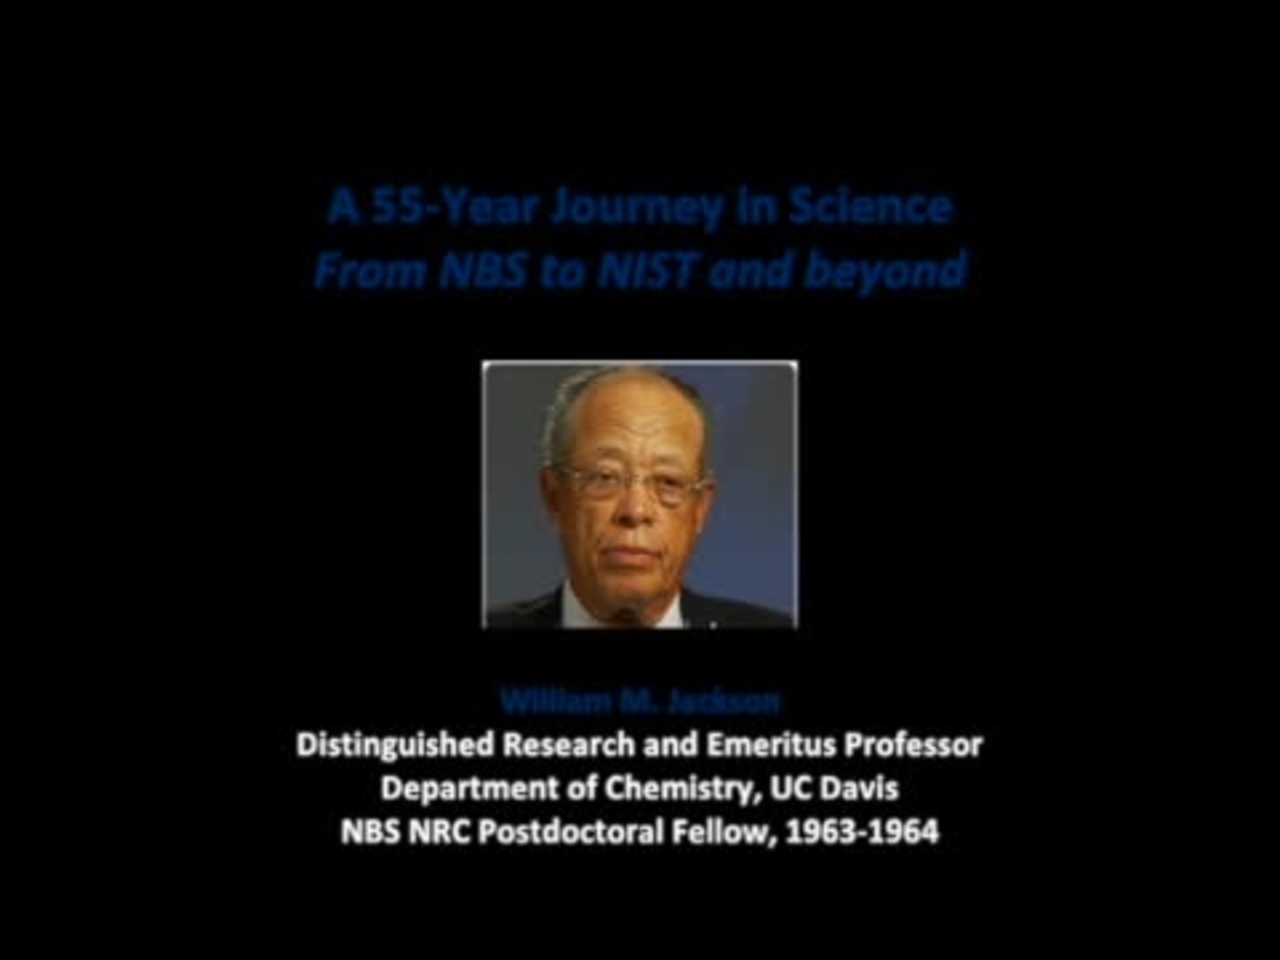 NIST Colloquium Series: A 55-year Journey in Science From NBS to NIST and beyond